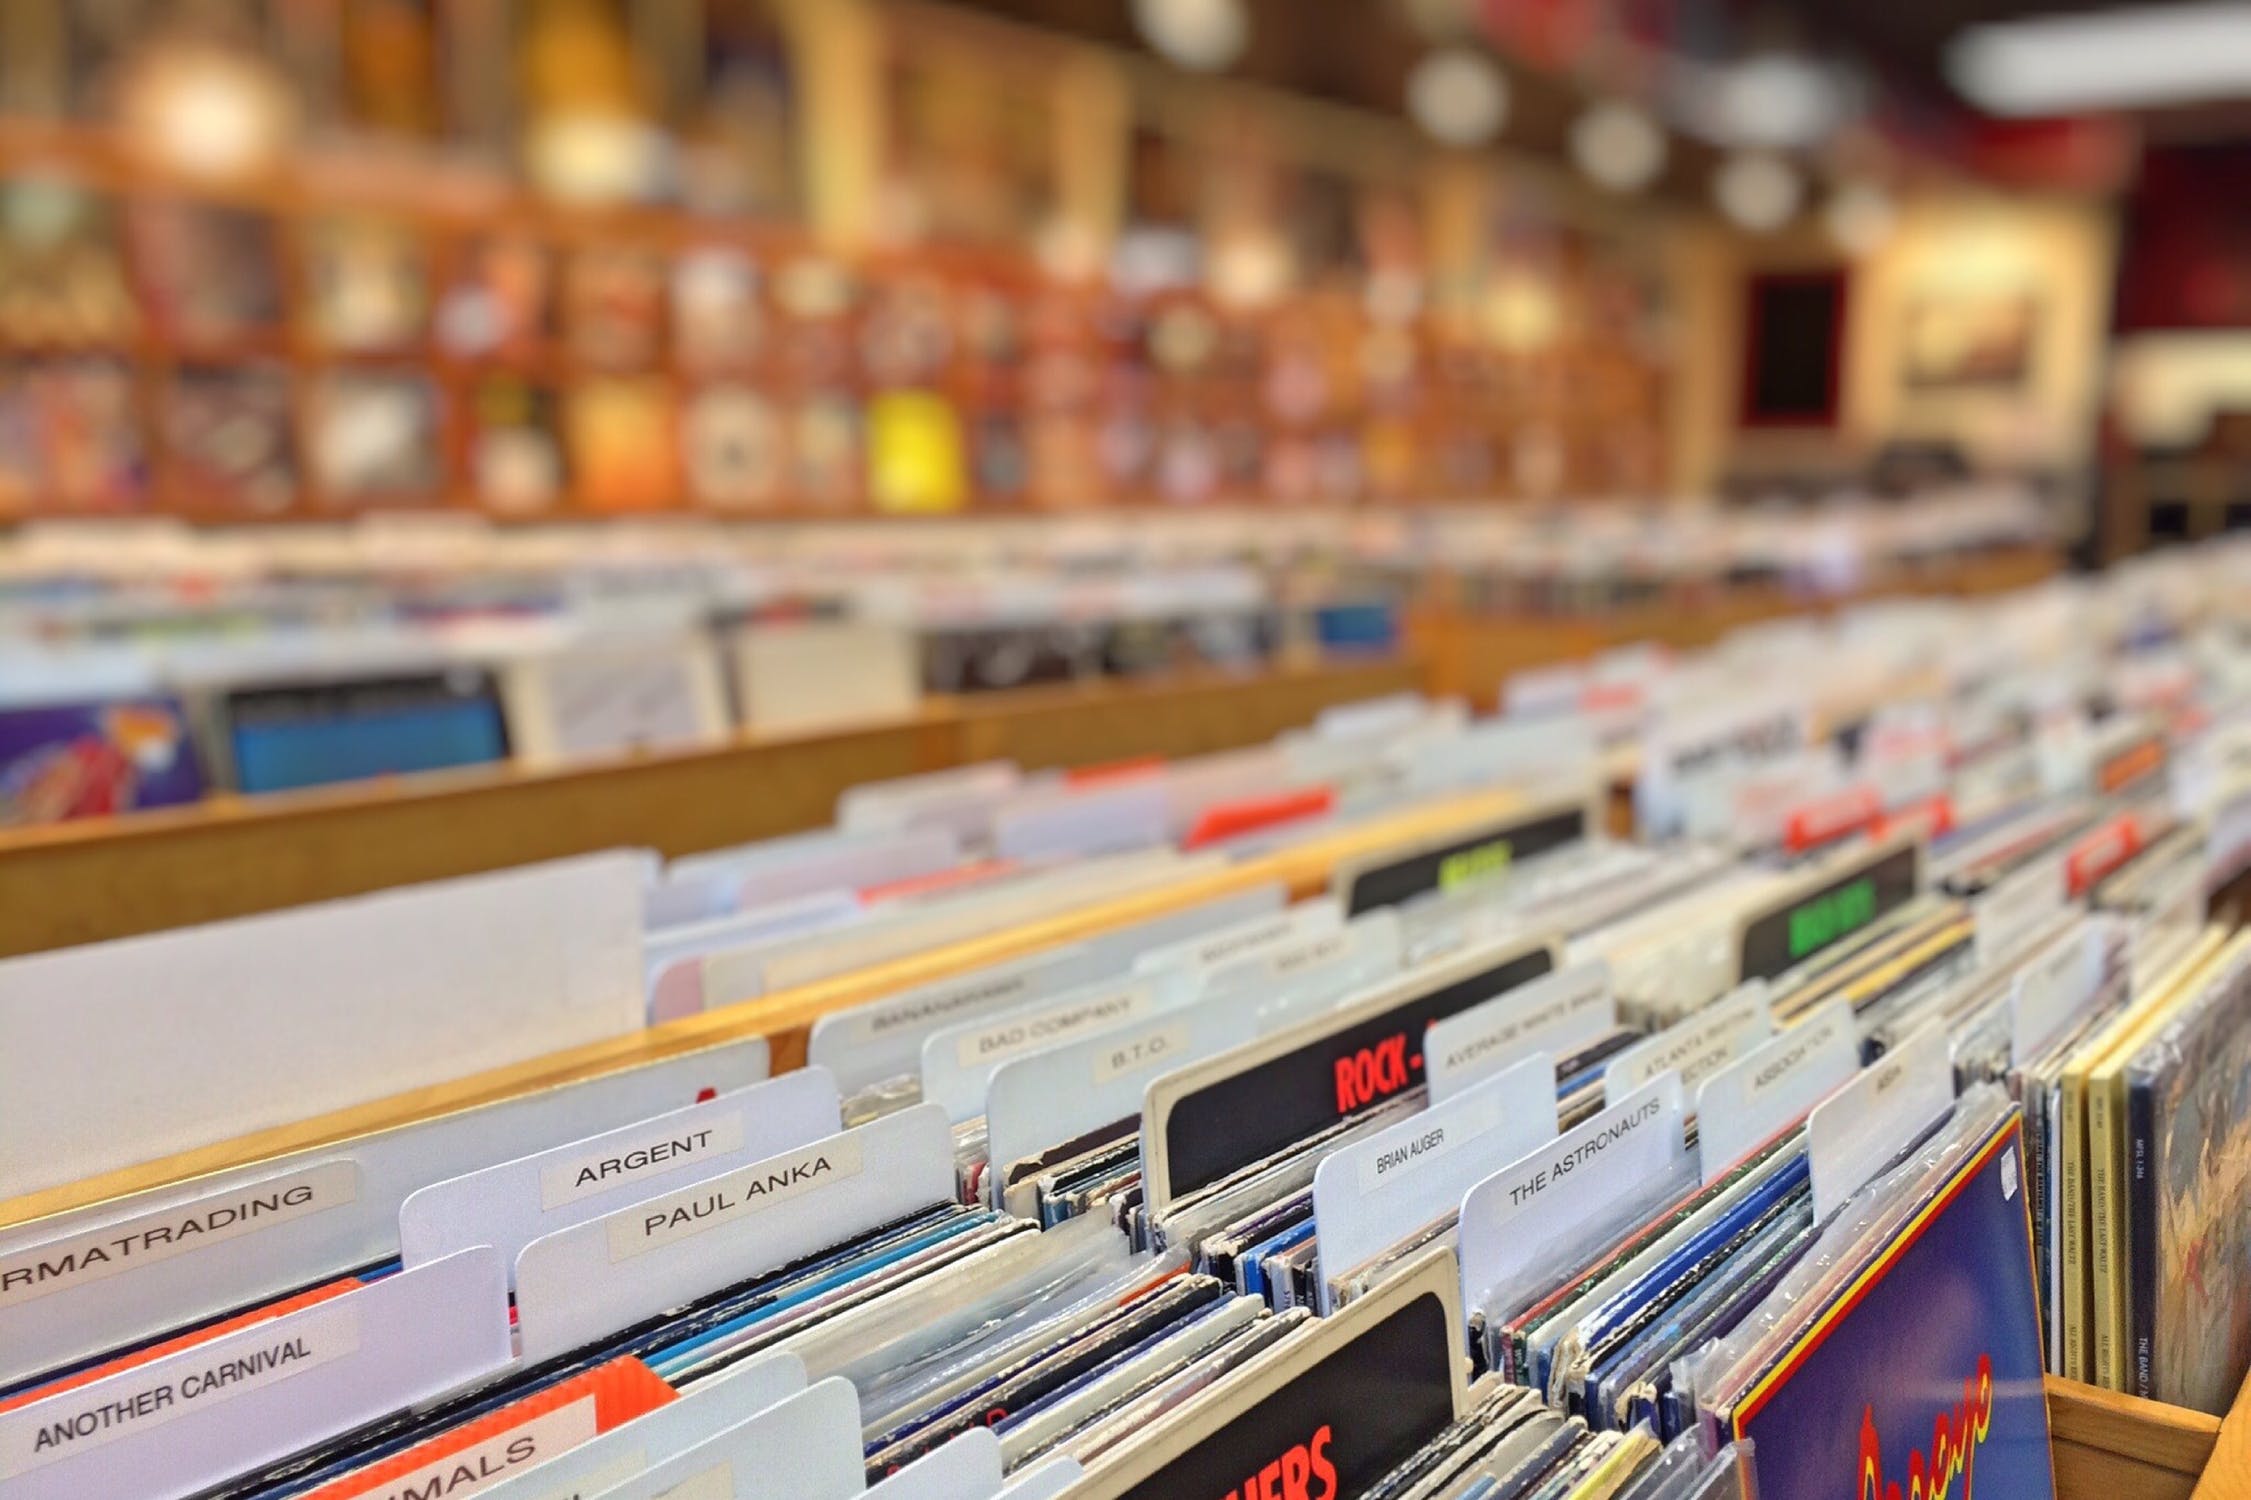 Report: UK music stores offering less scope for impulse buying, affecting physical sales